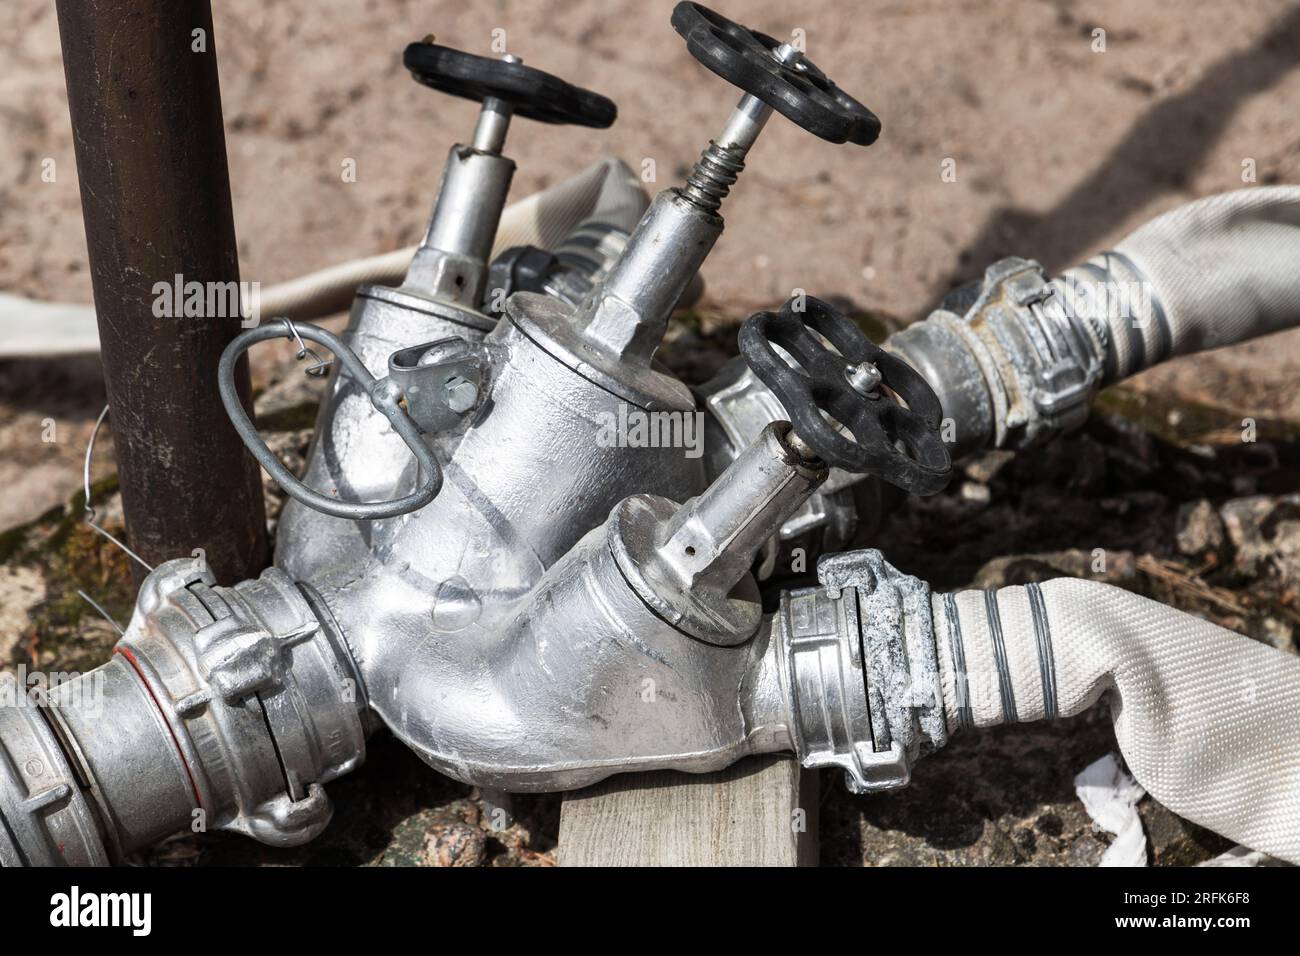 Fire pipe splitter with taps, close up outdoor photo Stock Photo